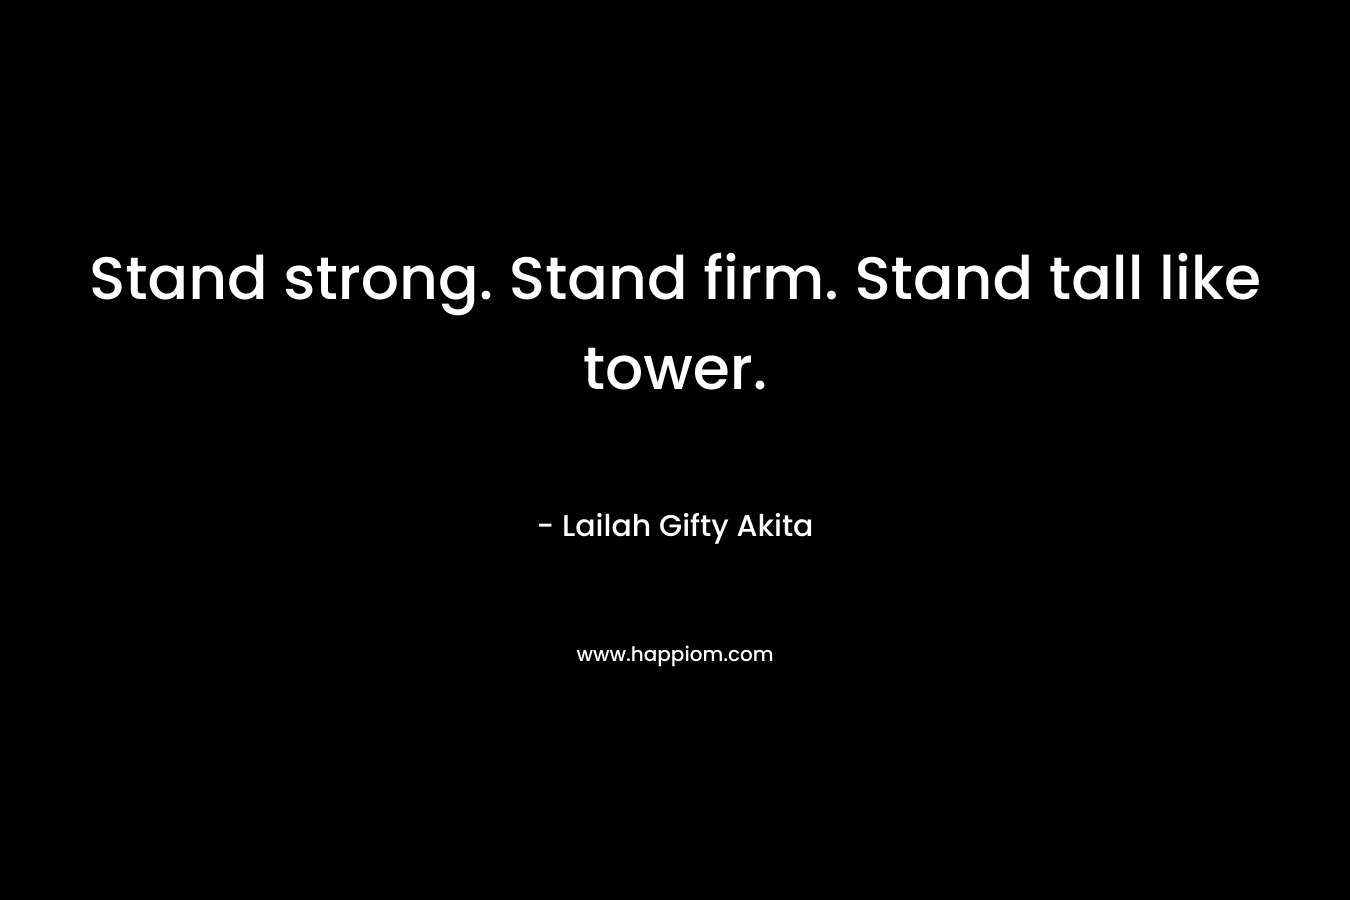 Stand strong. Stand firm. Stand tall like tower.